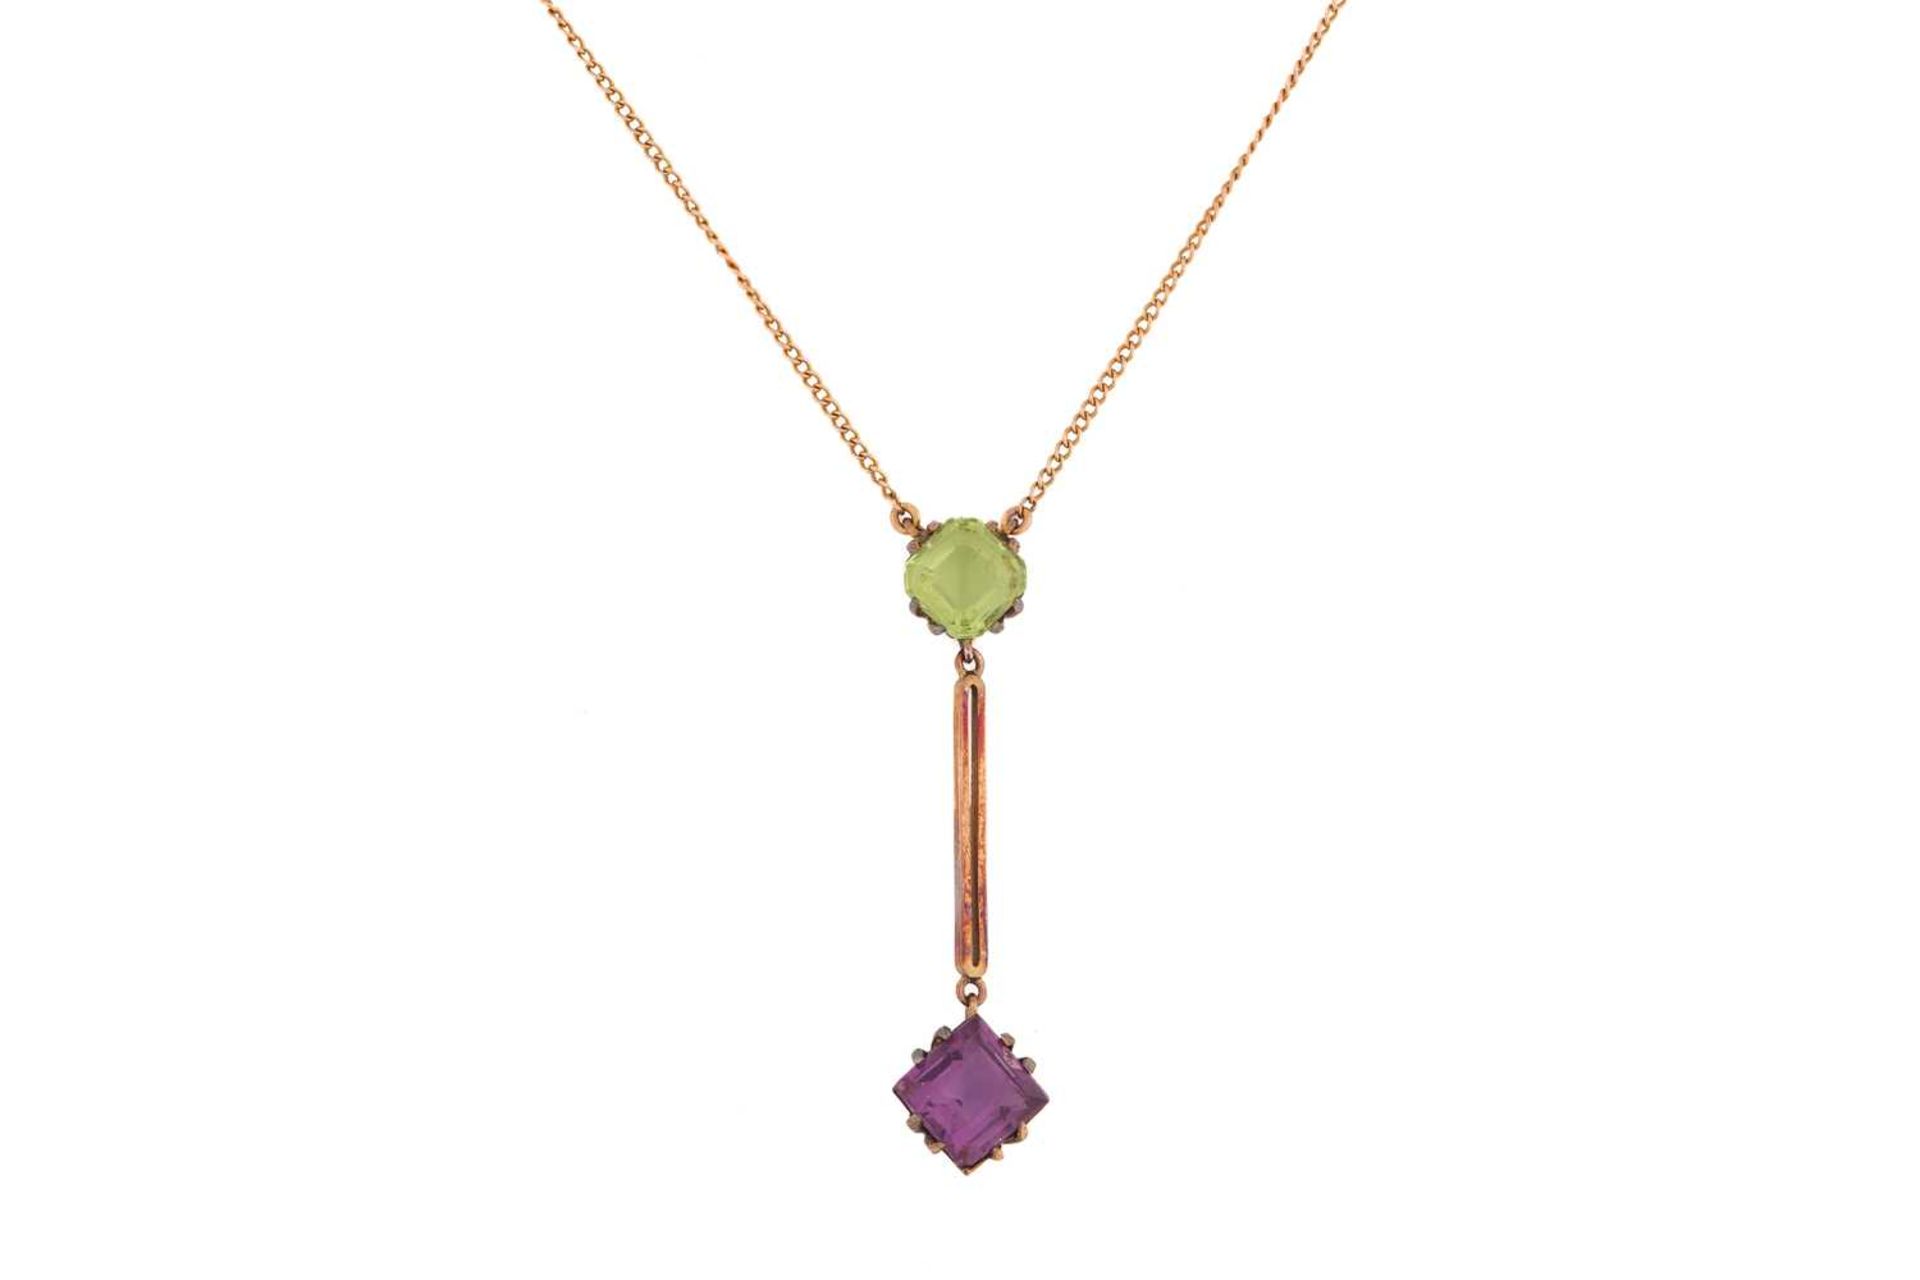 A lavalier necklace set with green and purple paste, the pendant comprises a square step-cut